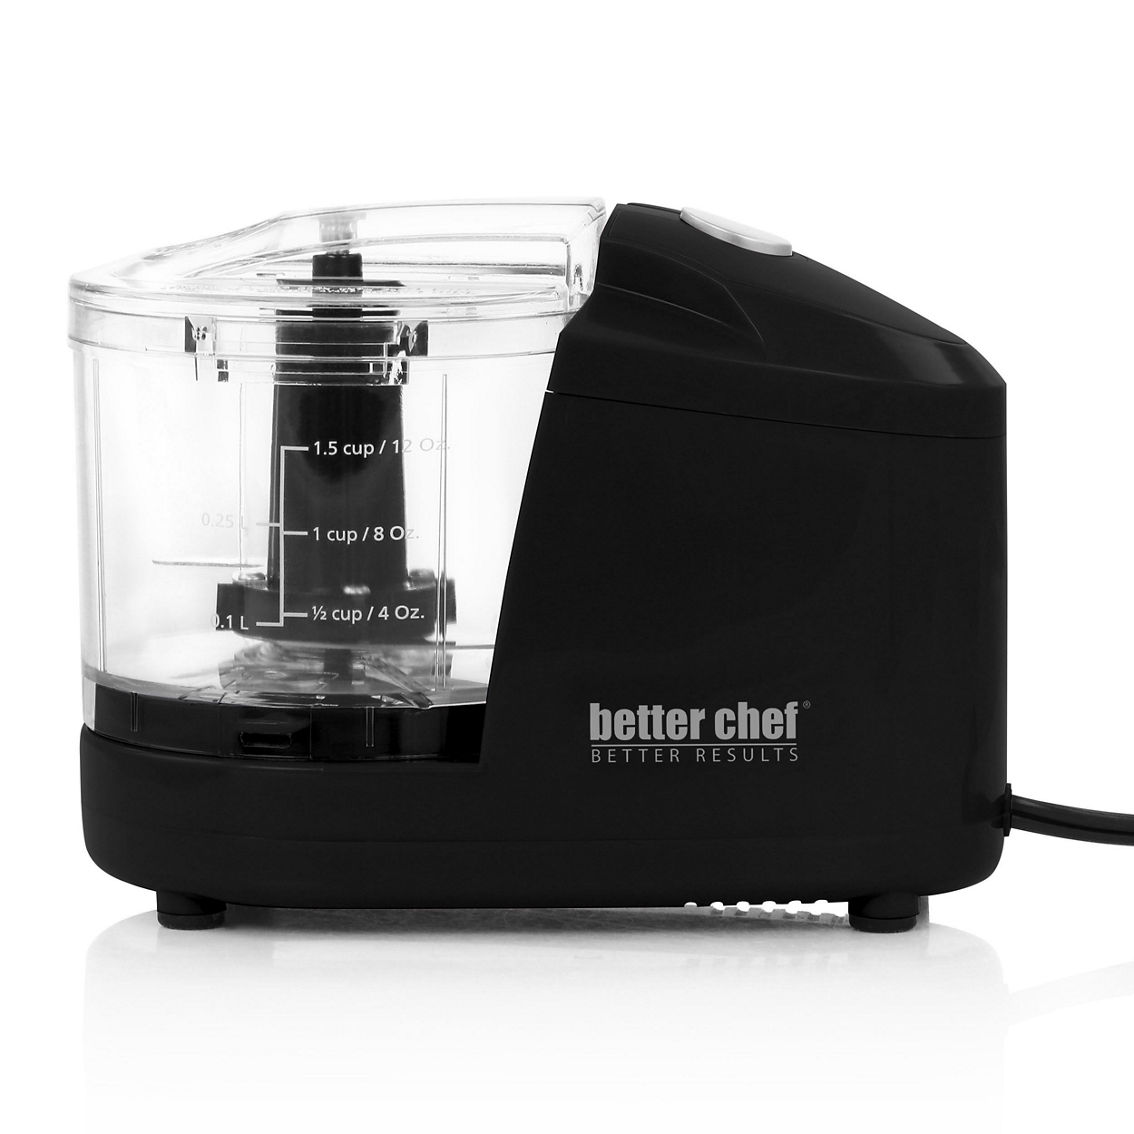 Better Chef 1.5 Cup Safety Lock Compact Chopper in Black - Image 2 of 5